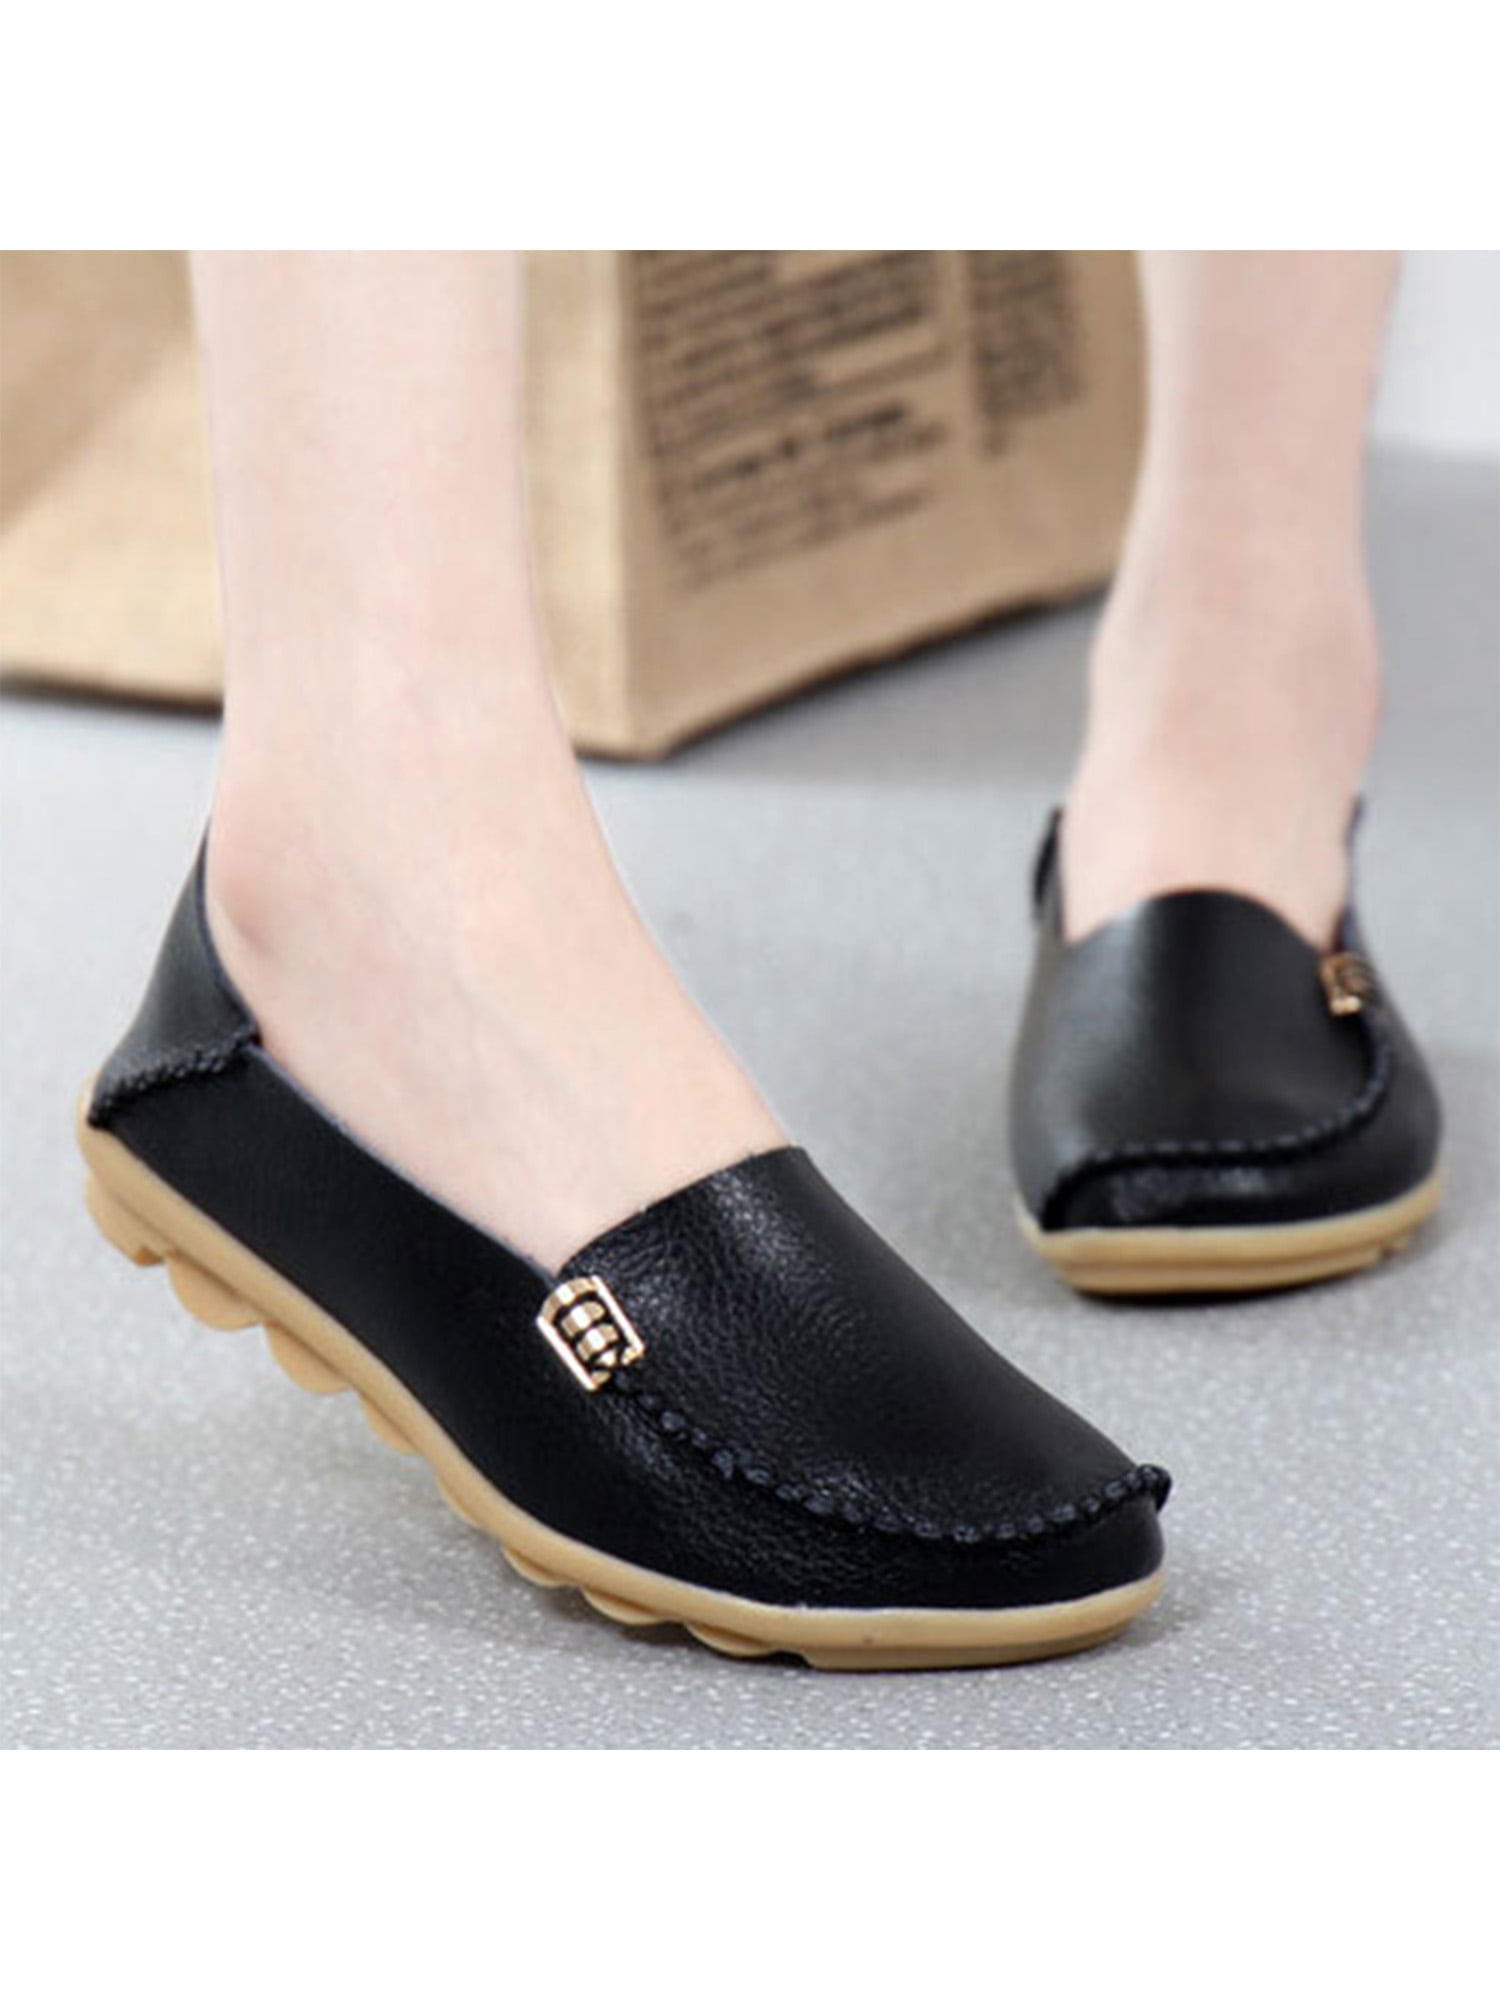 Womens Comfort Flats Pumps Loafers Moccasin 2018 Shoes Slip On Leisure Outdoor 